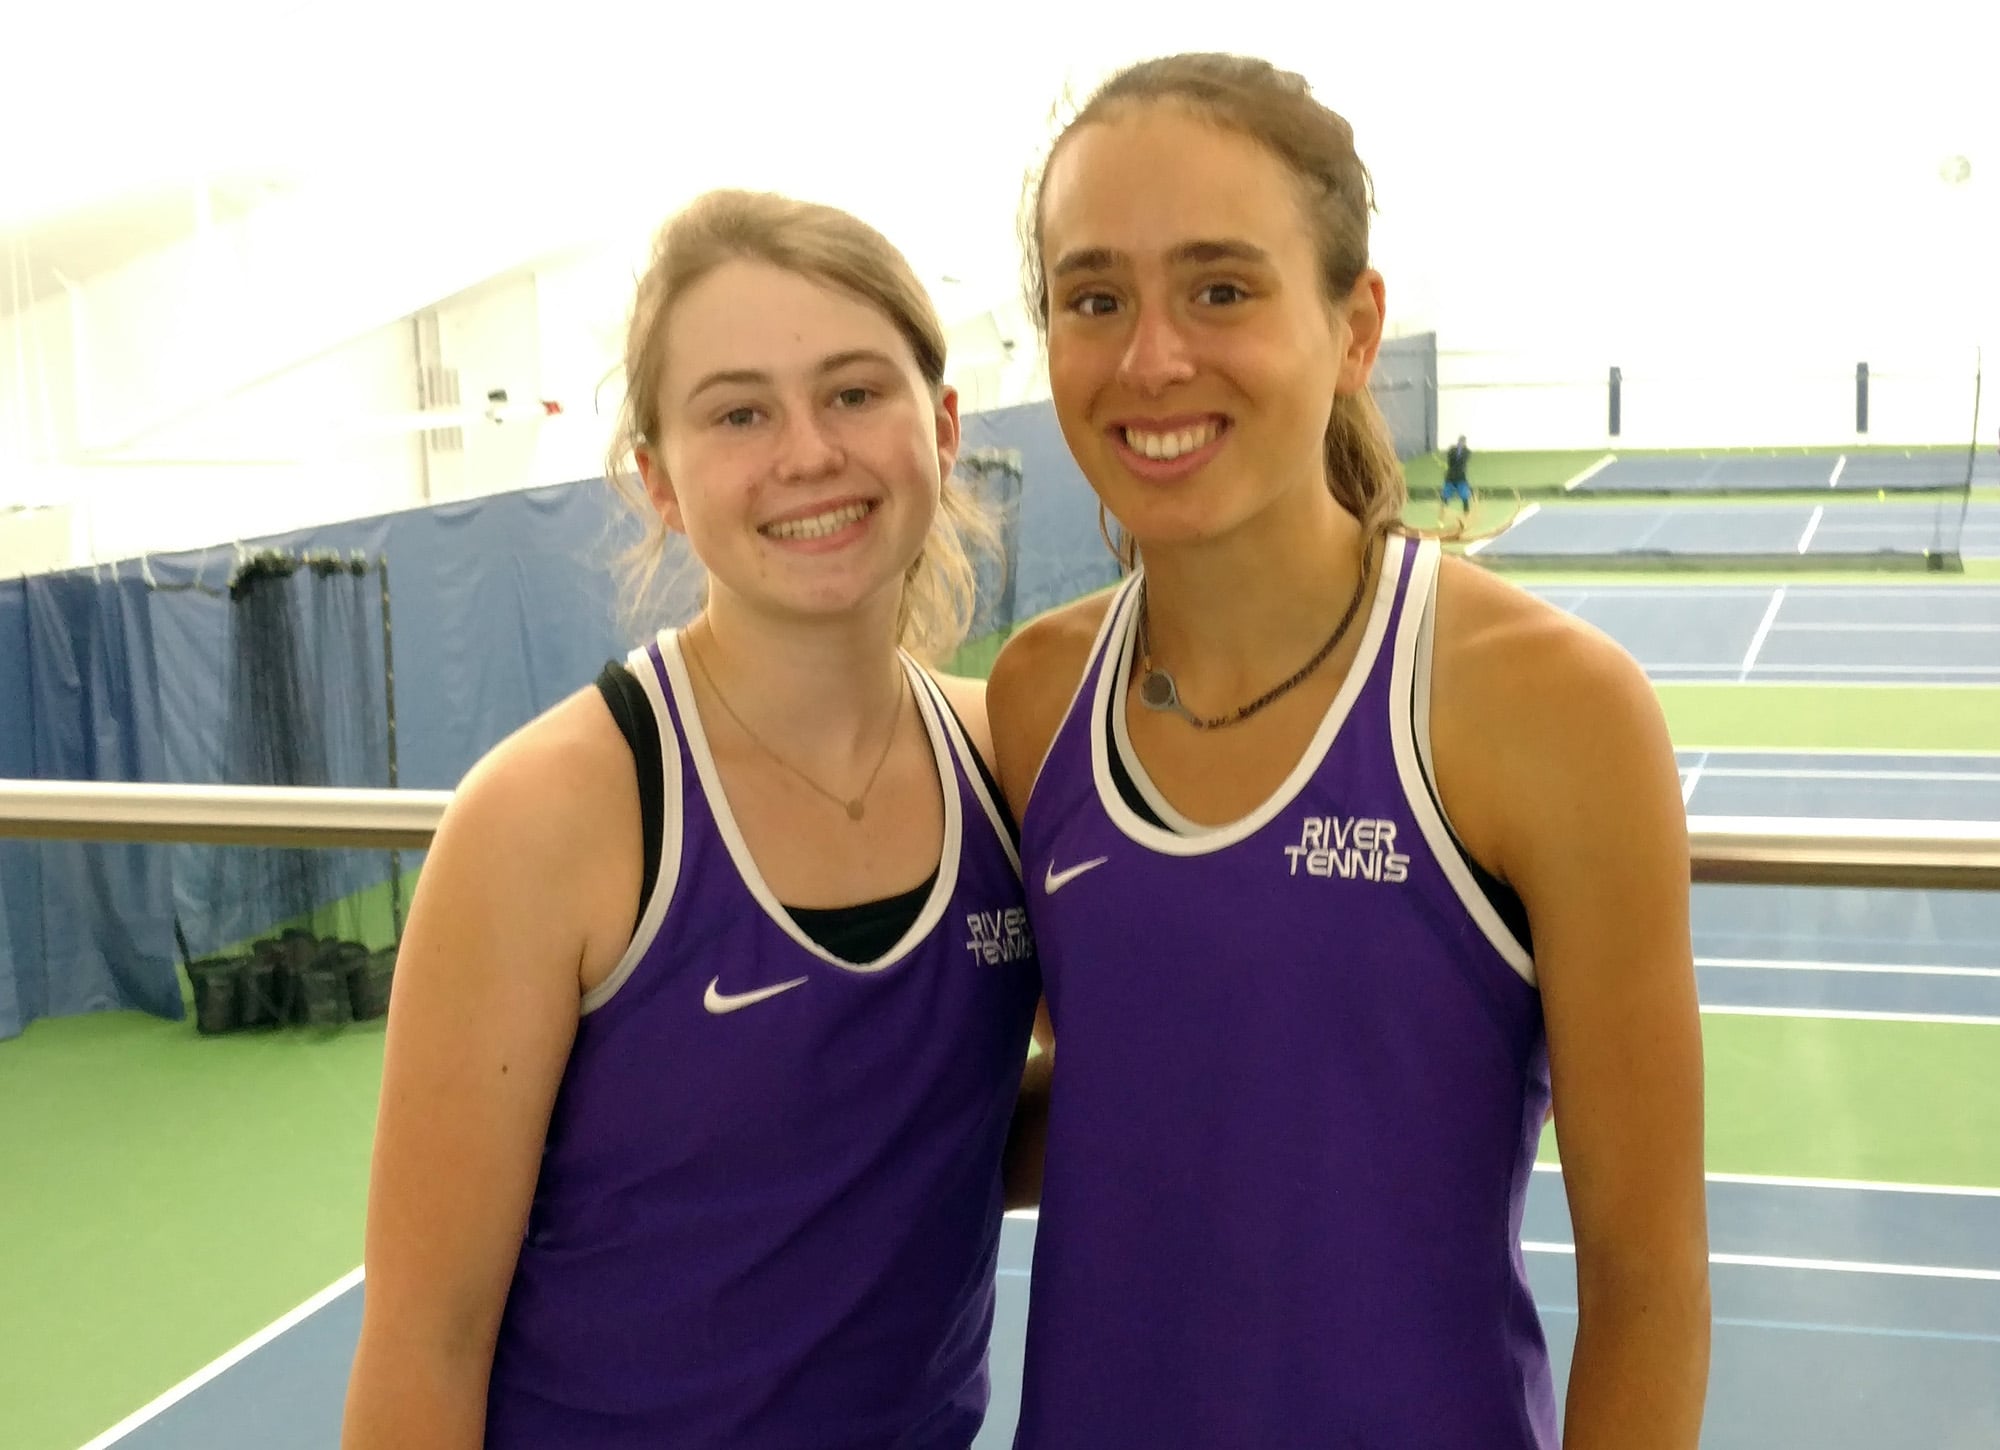 Columbia River sophomore Piper Rylander, left, and senior Faith Grisham. Grisham defeated Rylander 6-0, 6-0 in the 2A district singles final on Friday, May 17, 2019, at Vancouver Tennis Center. Both players will advance to the 2A state tournament in Seattle.